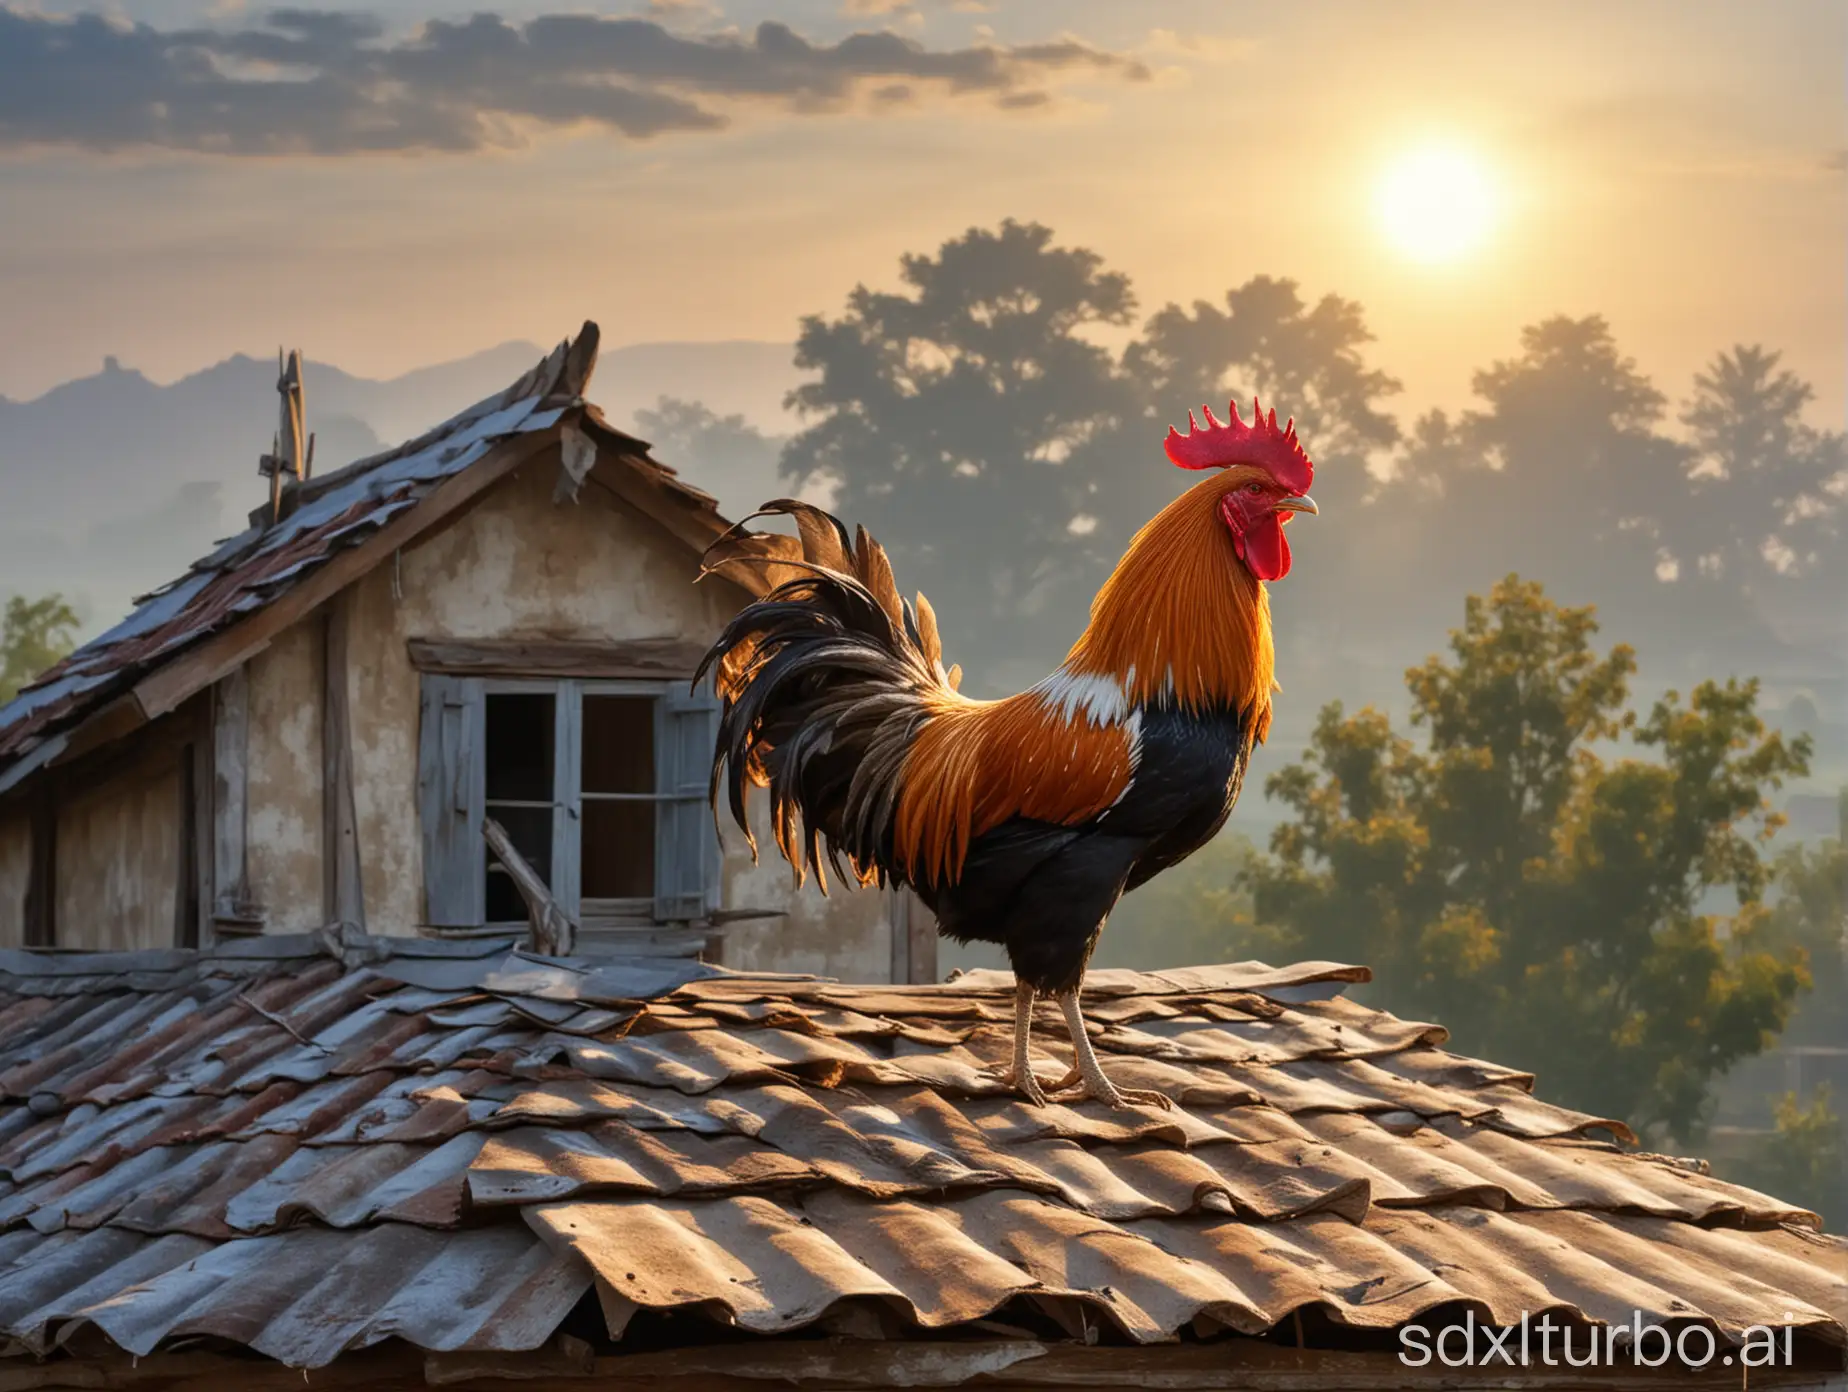 Draw a rooster standing on top of a rural house roof in the morning, crowing.